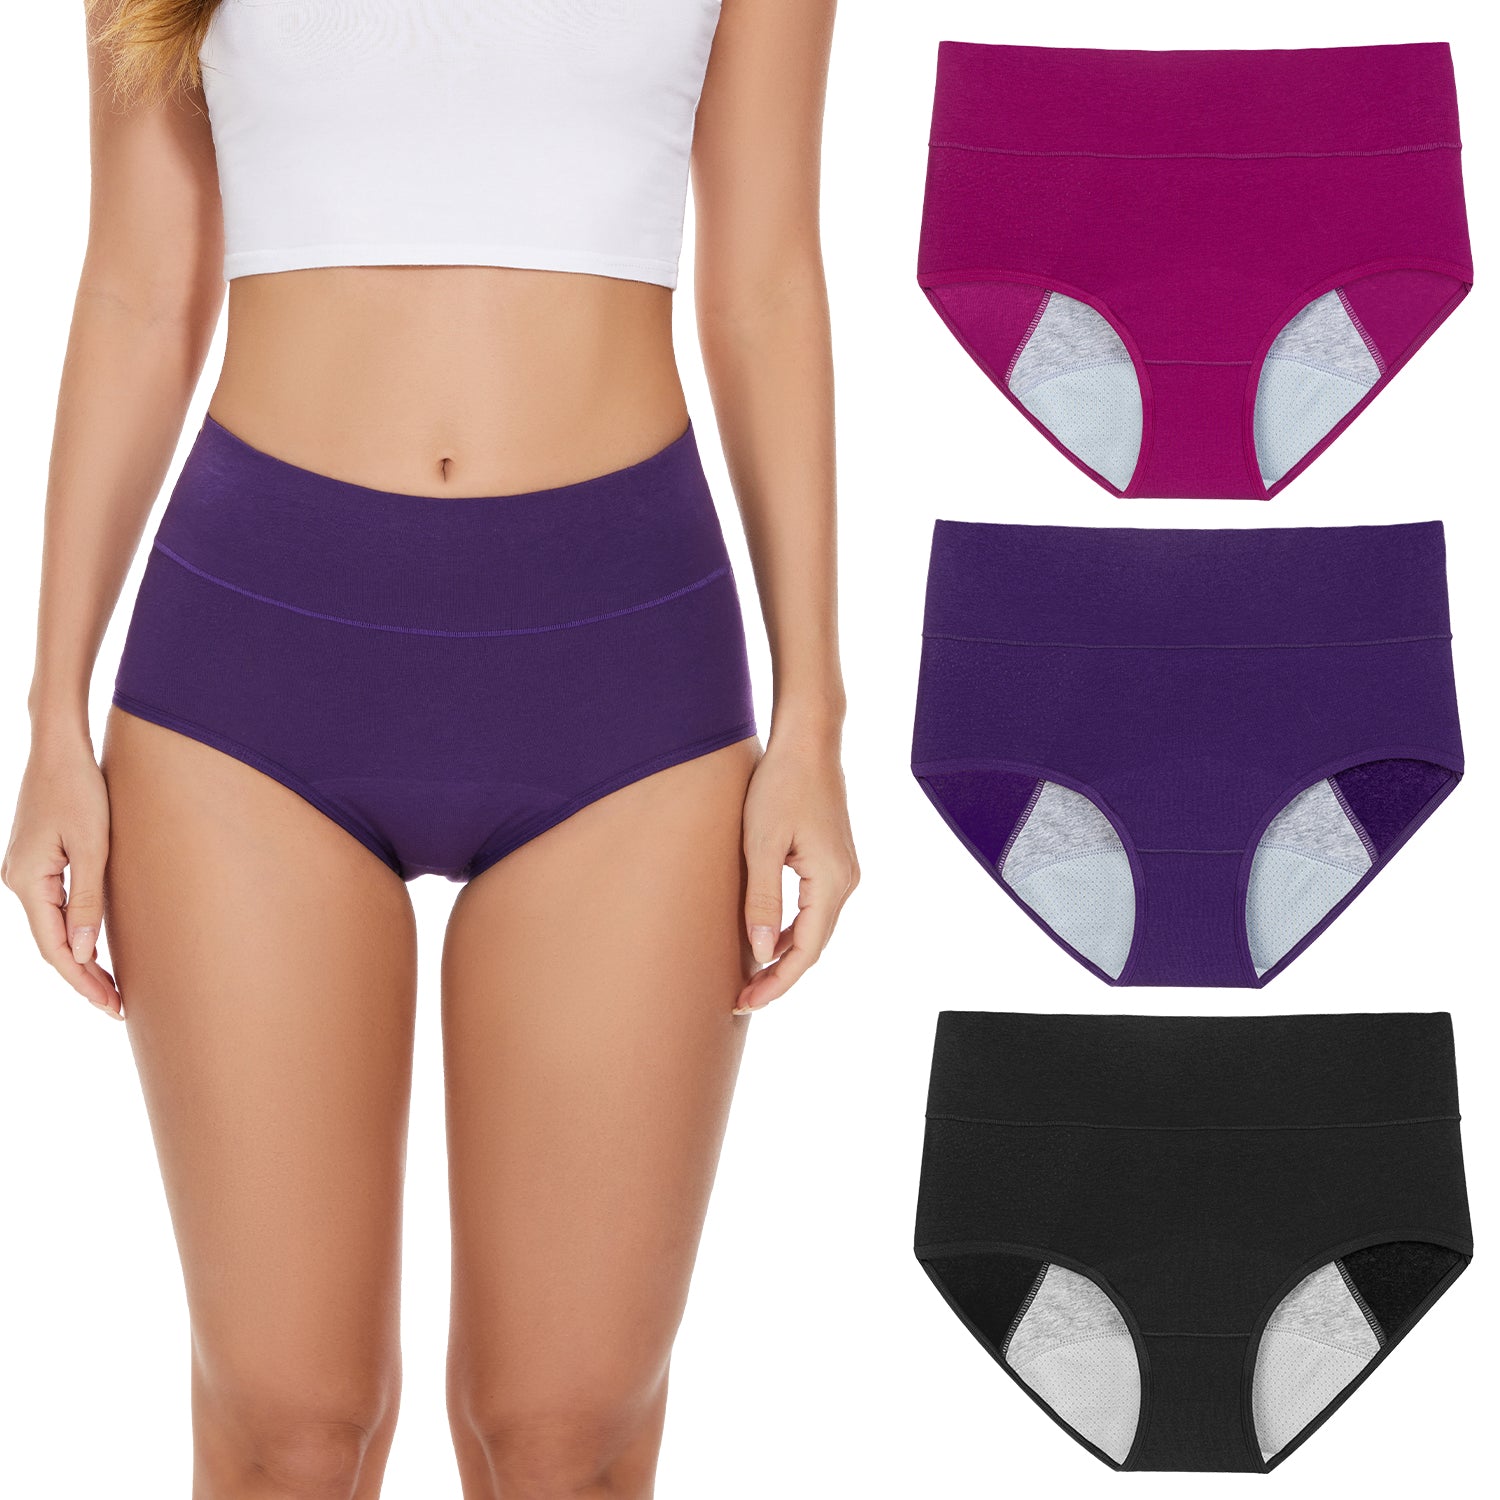 Leak Proof Cotton Physiological Period Seamless Cotton Panties For Women  Soft, Breathable, And Sexy Menstrual Underwear From Char21, $28.69